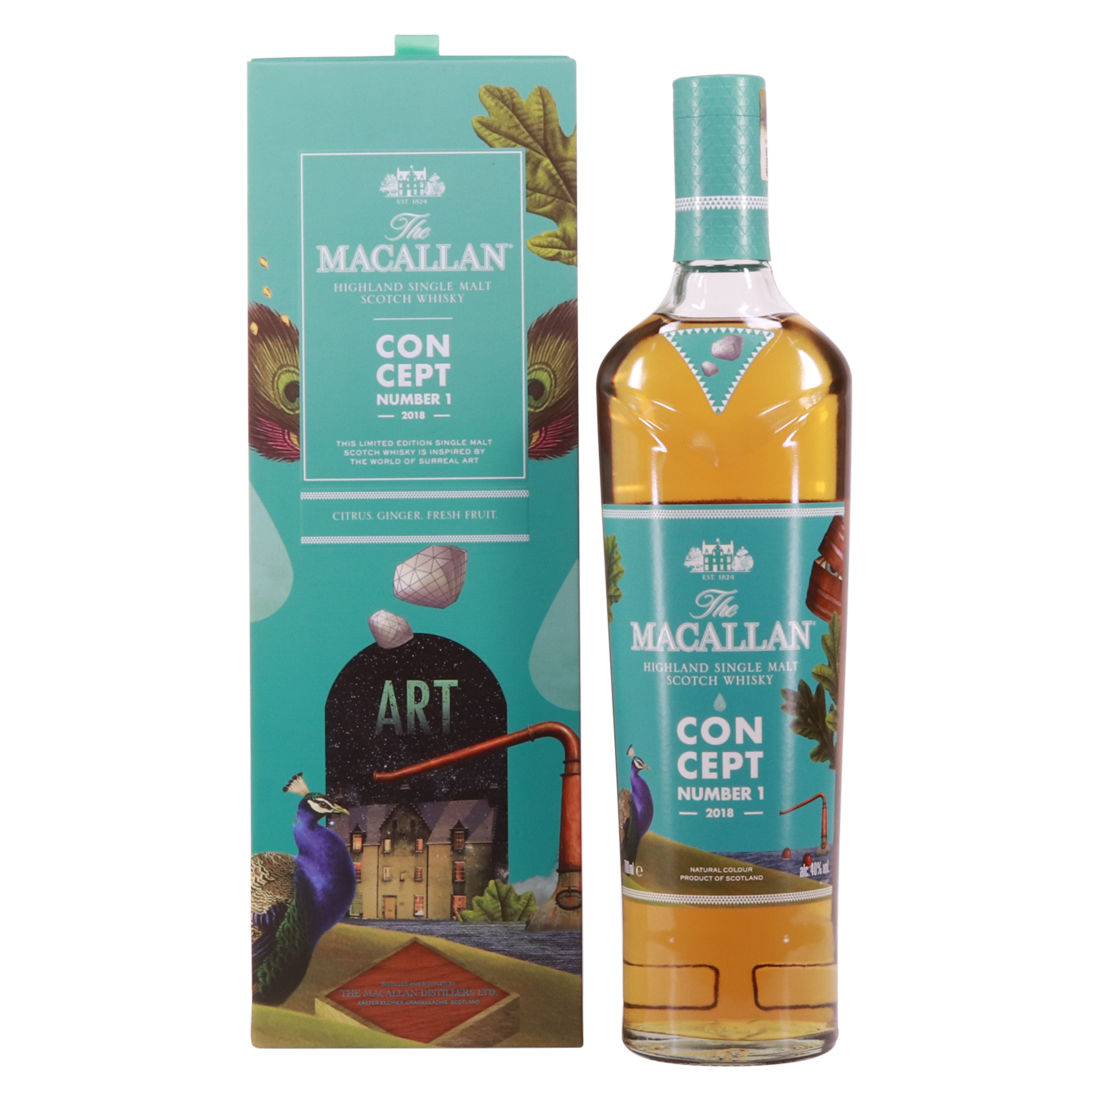 Macallan Concept No 1 2018 Auction The Grand Whisky Auction